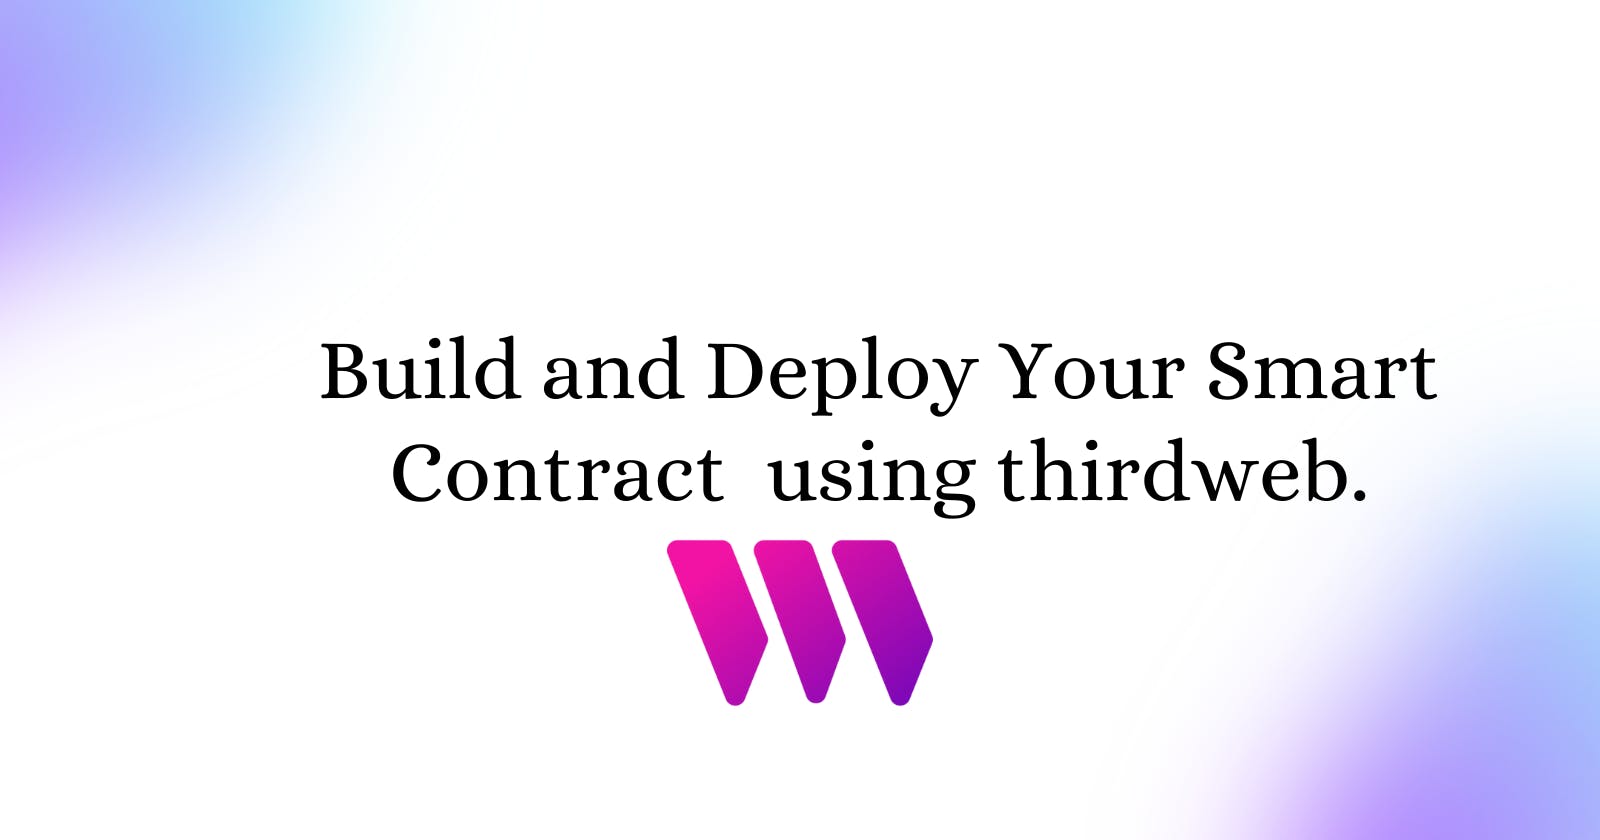 Build and Deploy Your Smart Contract  using thirdweb.